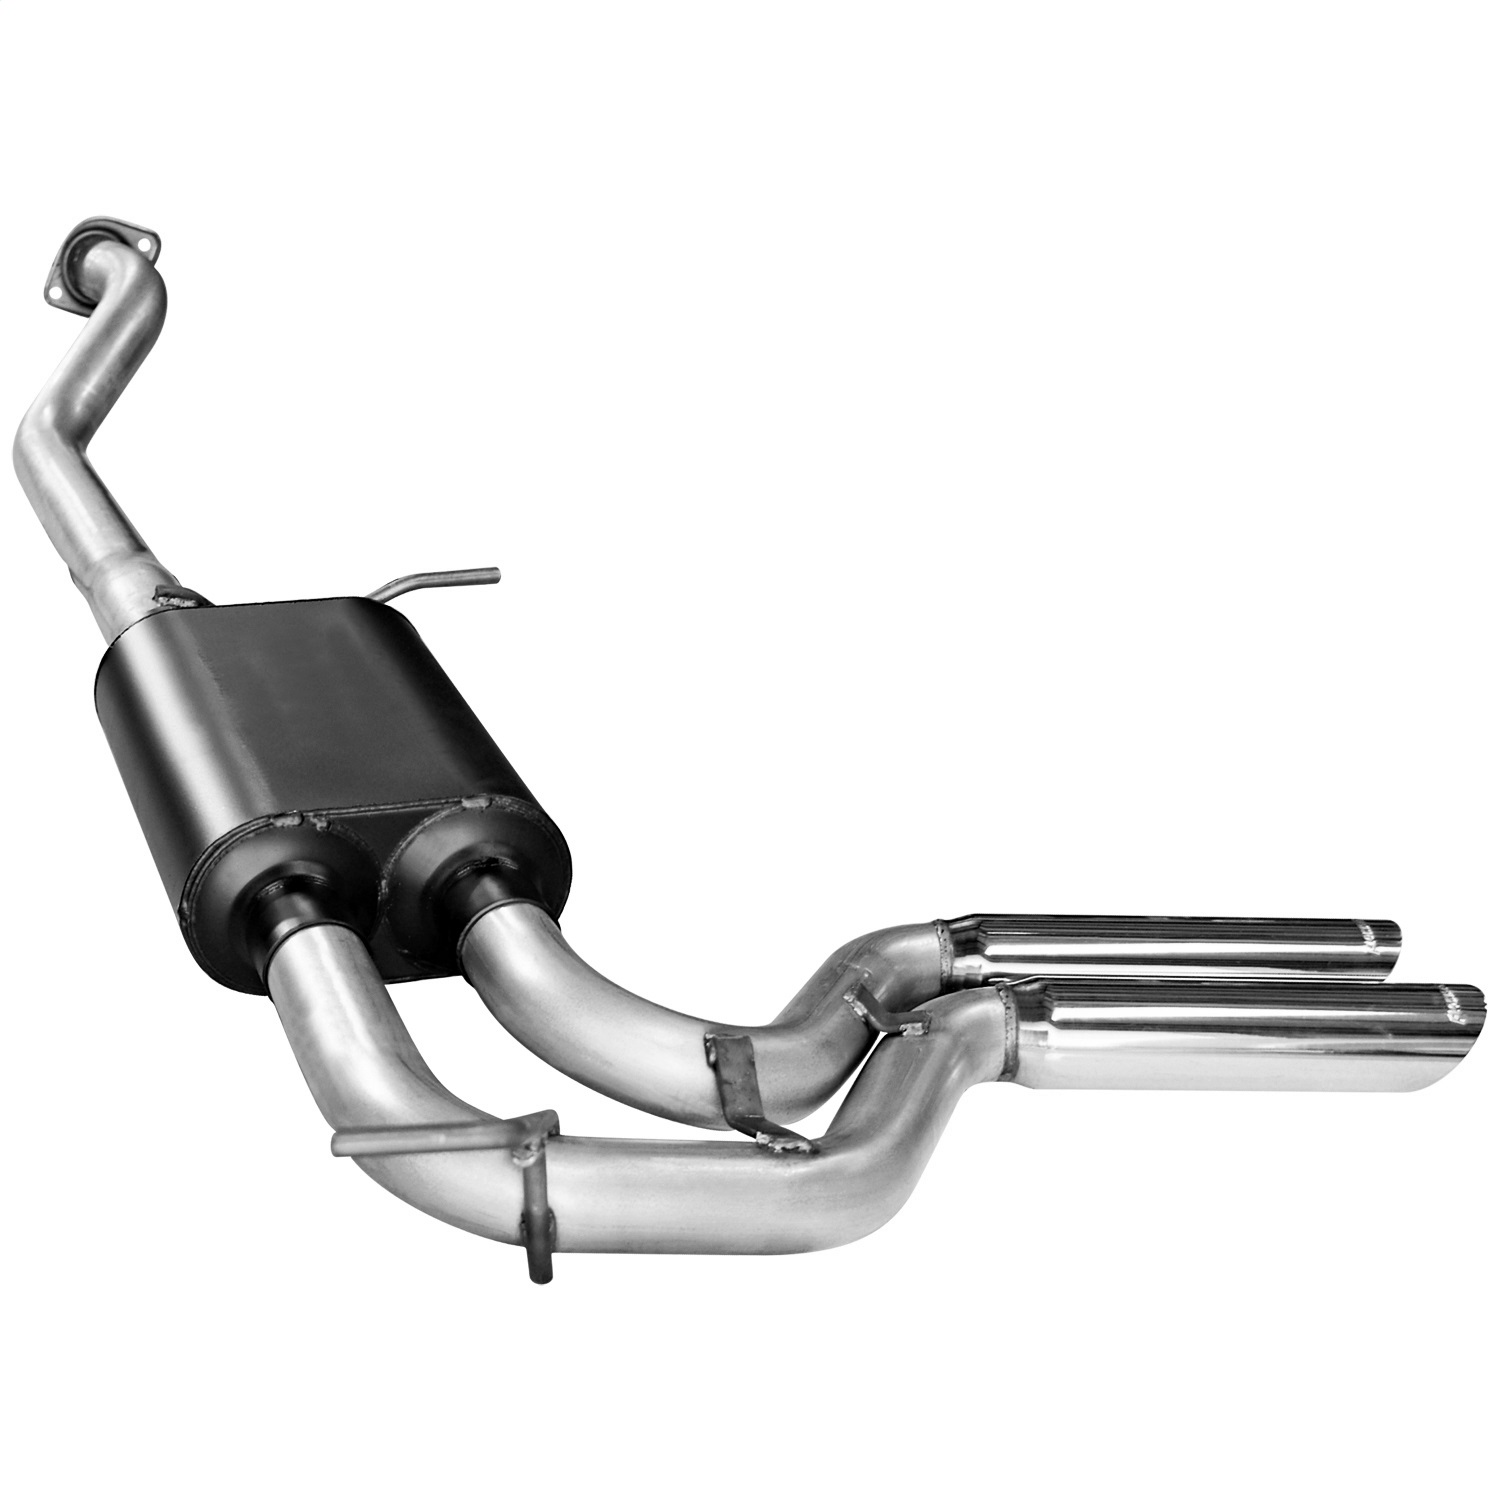 Flowmaster Flowmaster 17395 American Thunder Muscle Truck Exhaust System